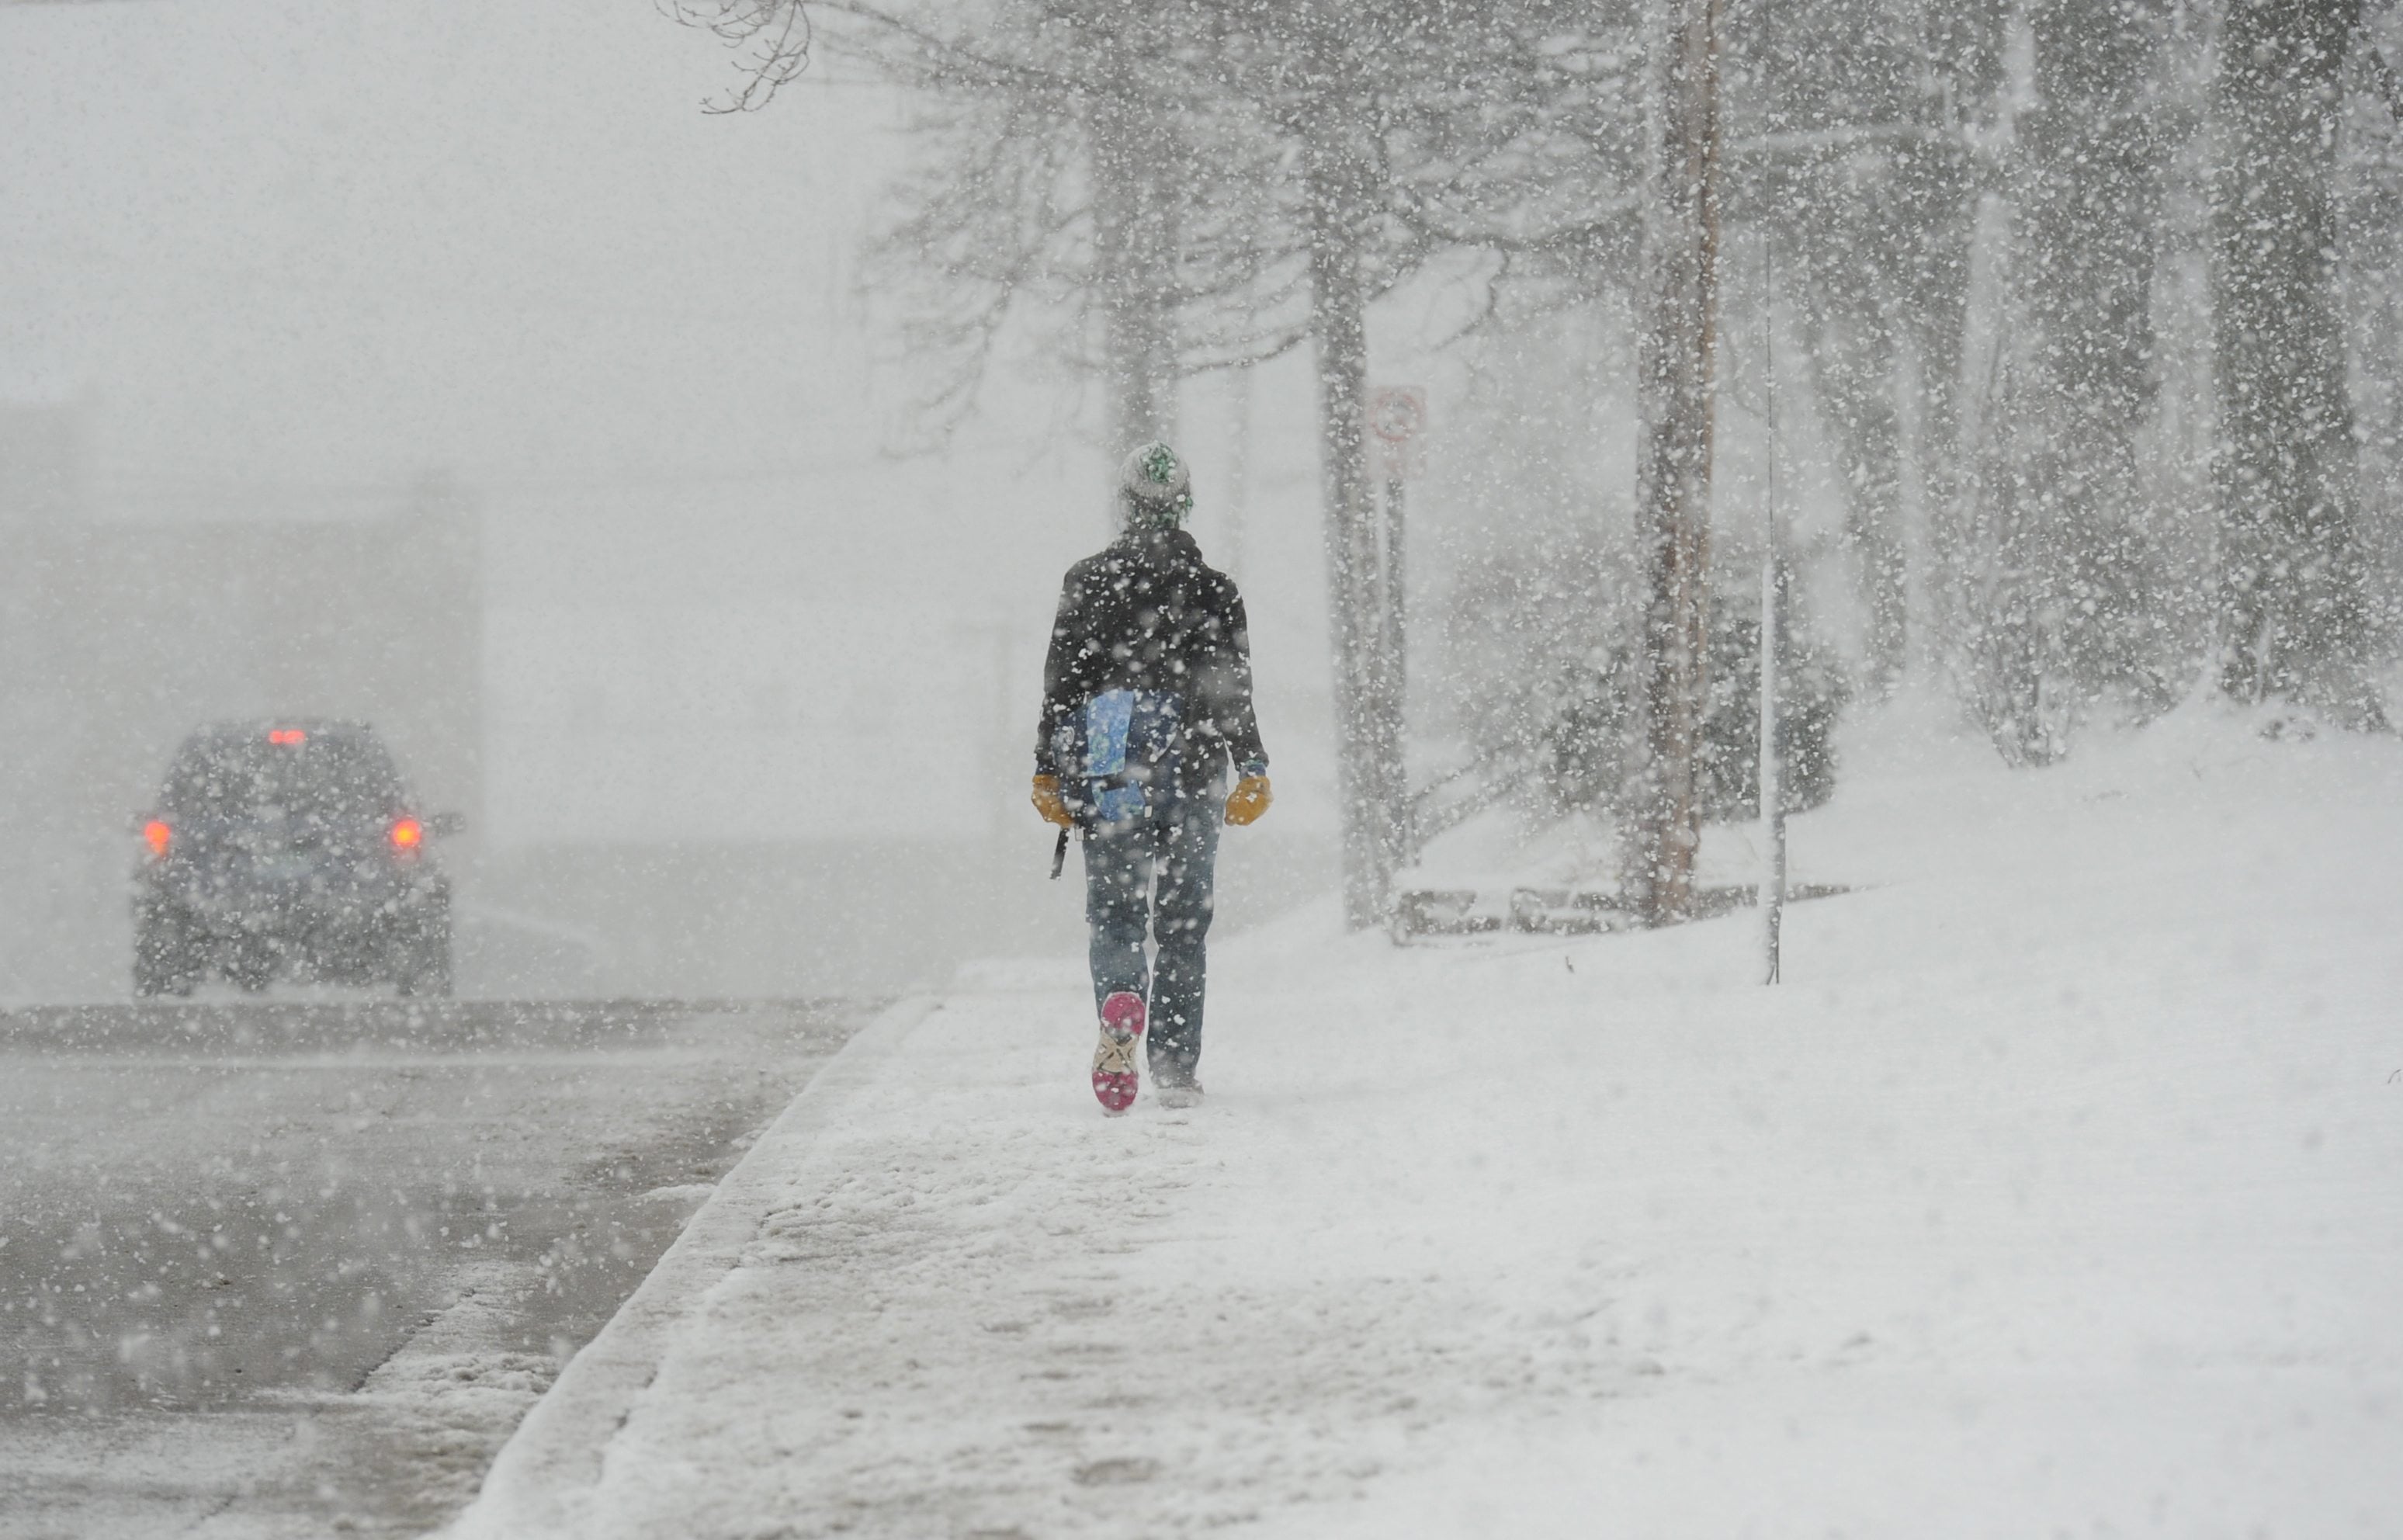 A pedestrian walks through heavy snowfall Wednesday in St. Joseph, Mich., Wednesday, Feb. 24, 2016. A winter storm moved across southwest Michigan Wednesday dumping several inches of snow in the area.